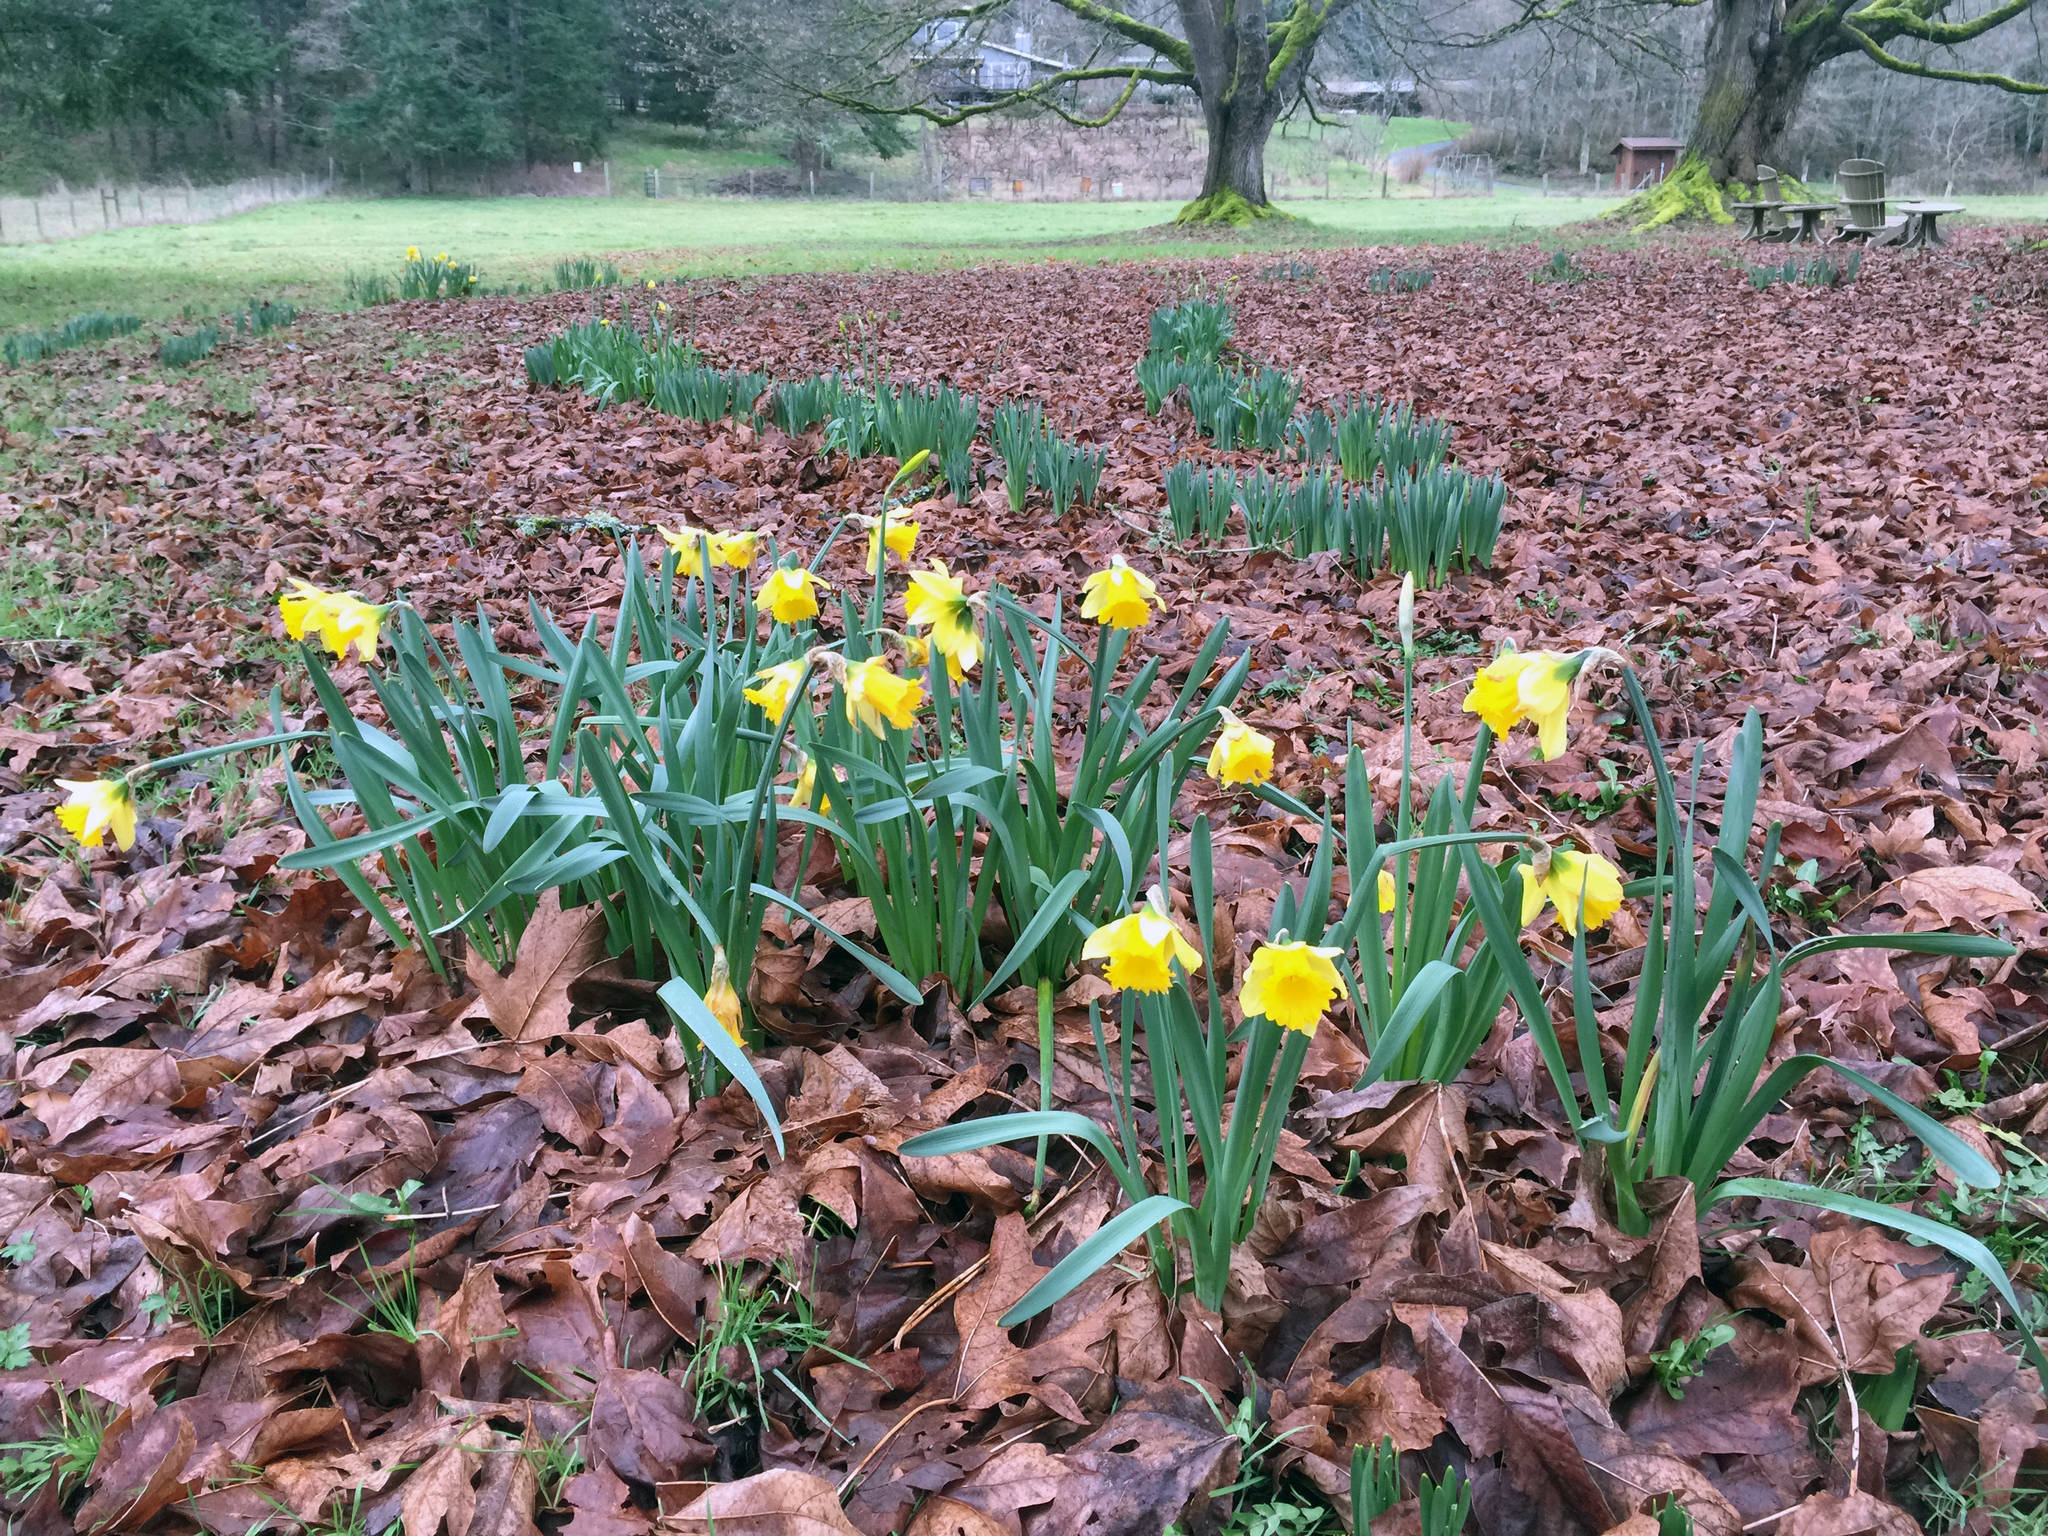 In this Feb. 27, 2017 photo, daffodils, photographed in a pasture near Langley, Wash., are entering their third growing season but a number of factors — planting too shallow, bad timing when planted, growing conditions and predation — could keep some from flowering. Leave perennial bulbs alone after they finish blooming. That gives them the time they need to re-energize and flower another year. (Dean Fosdick via AP)